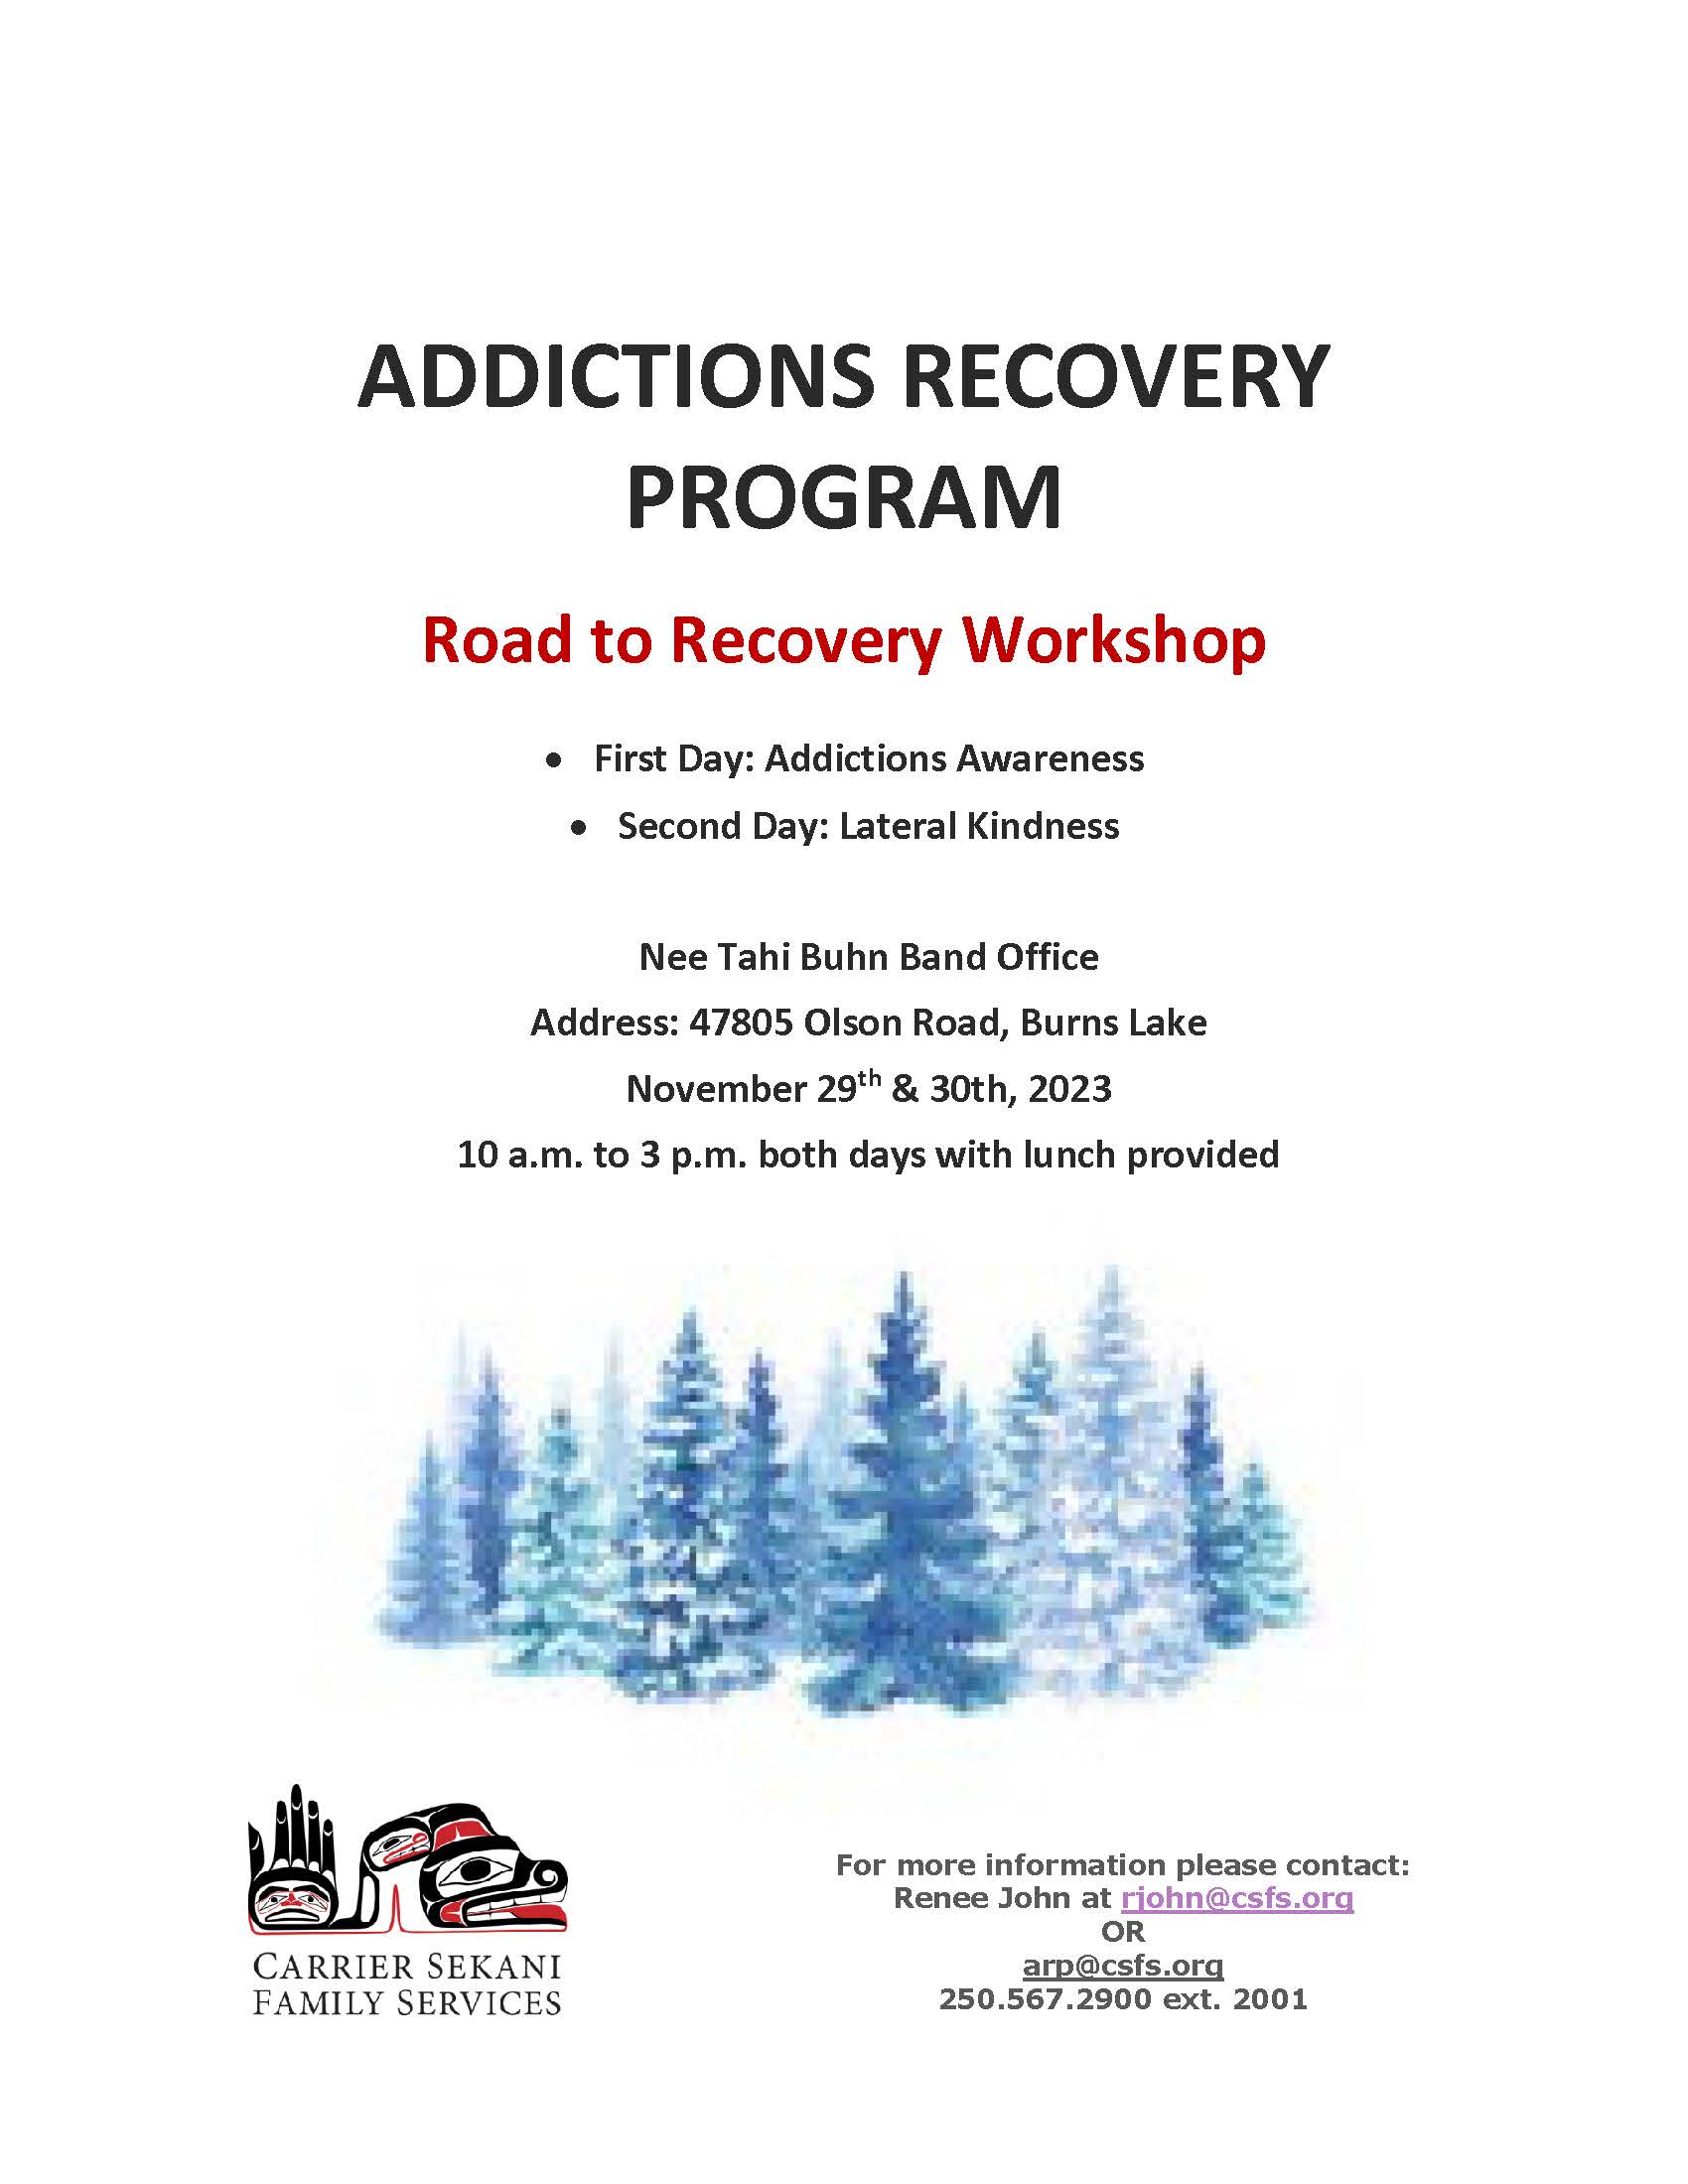 Addictions Recovery Program's Road to Recovery Workshop Event Poster